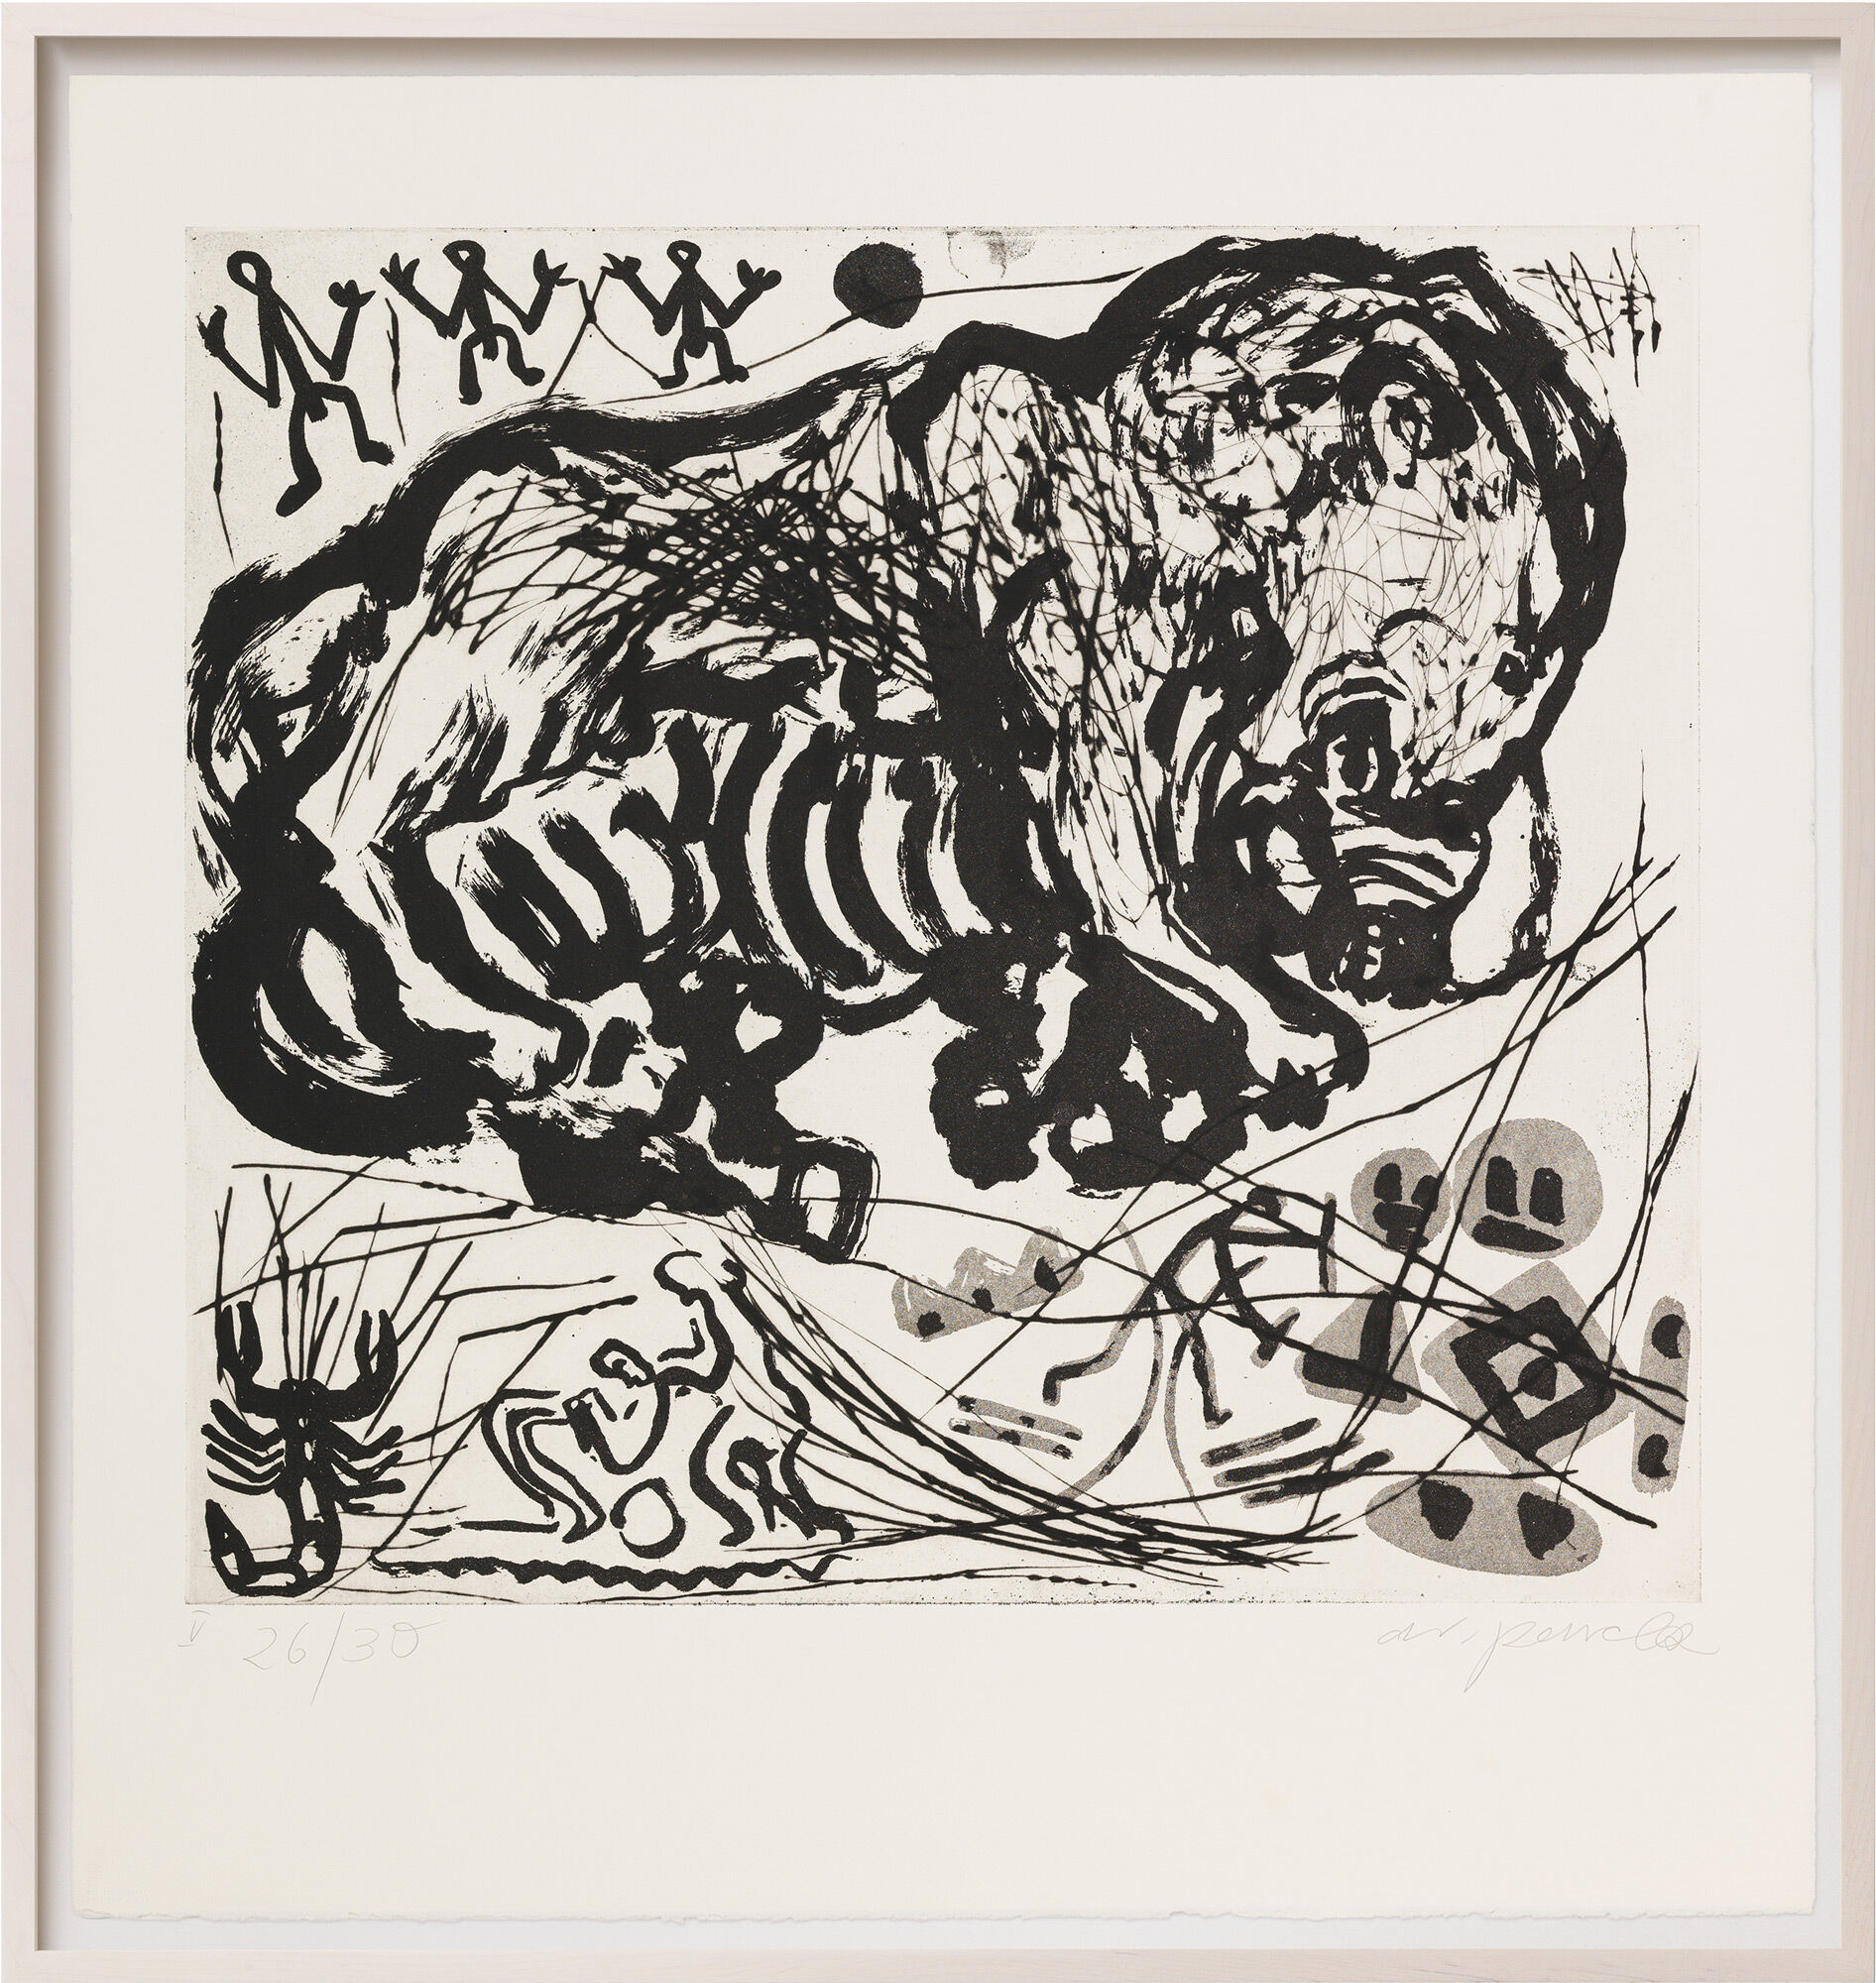 Picture "What Goes Through the Mind of an Emigrant - Panel V" (1987) (Unique piece) by A. R. Penck